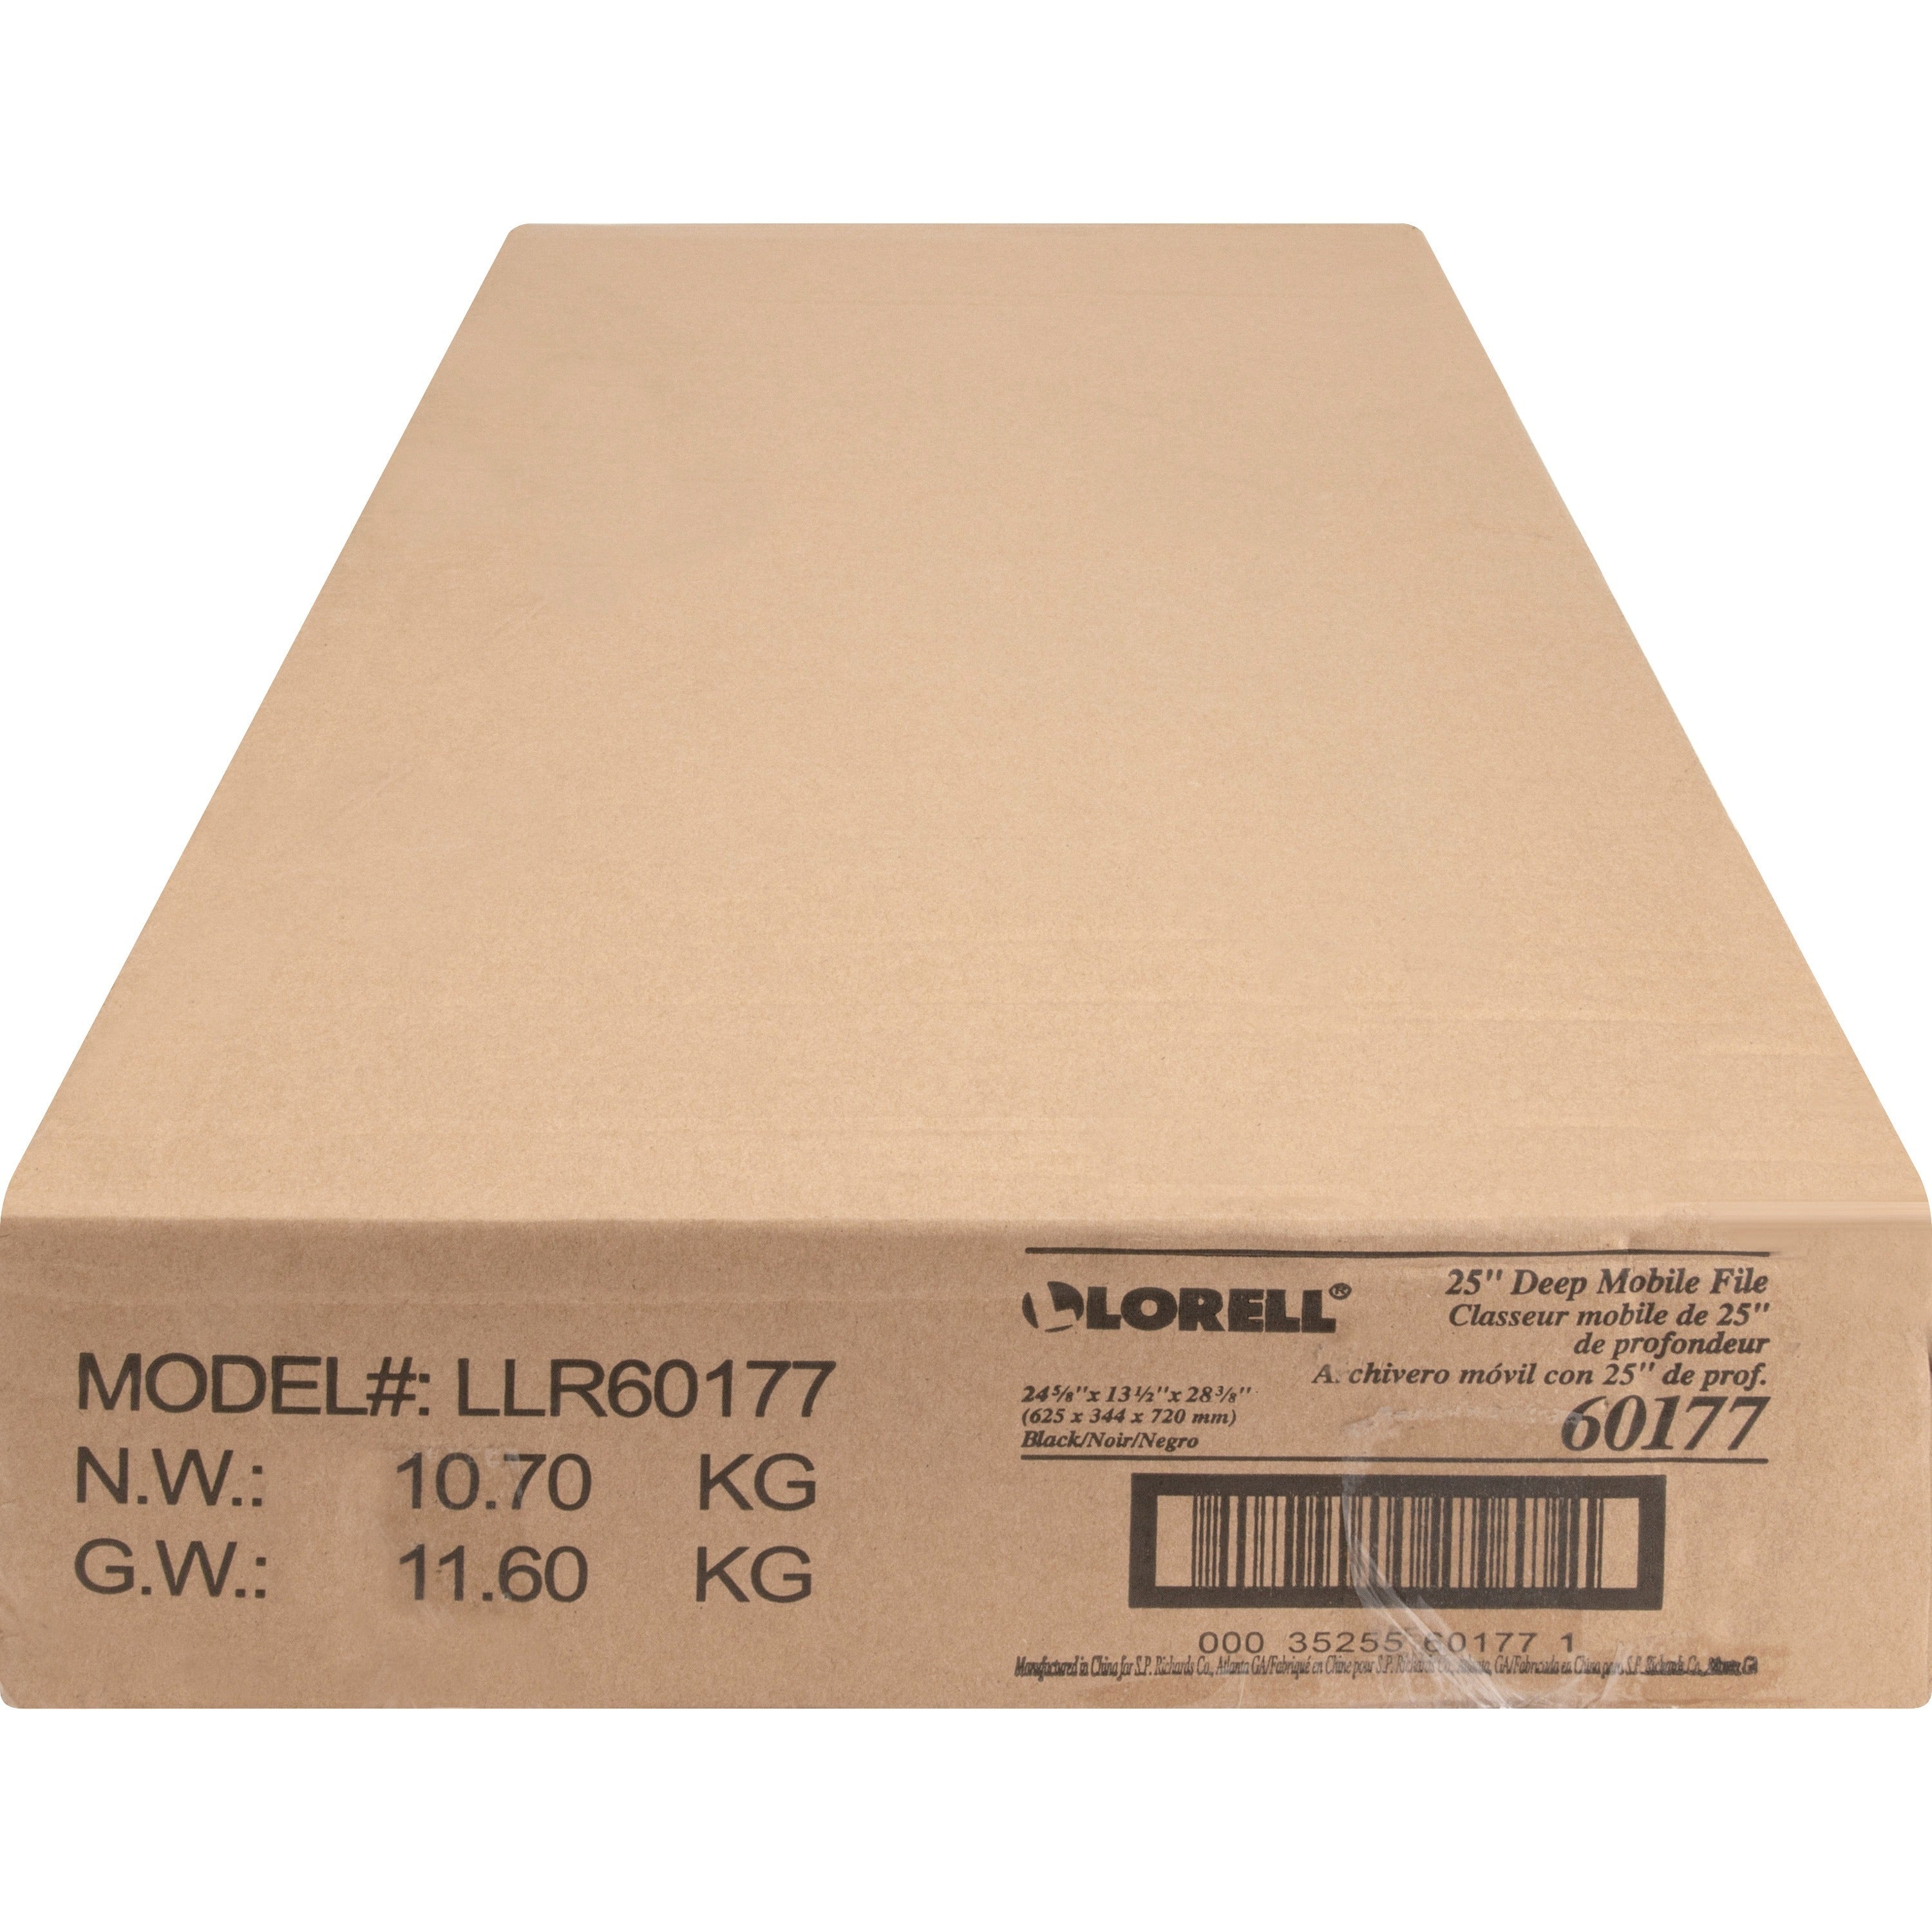 Lorell Standard Mobile File - 4 Casters - x 13.5" Width x 24.8" Depth x 28.3" Height - Black - 1 Each - 